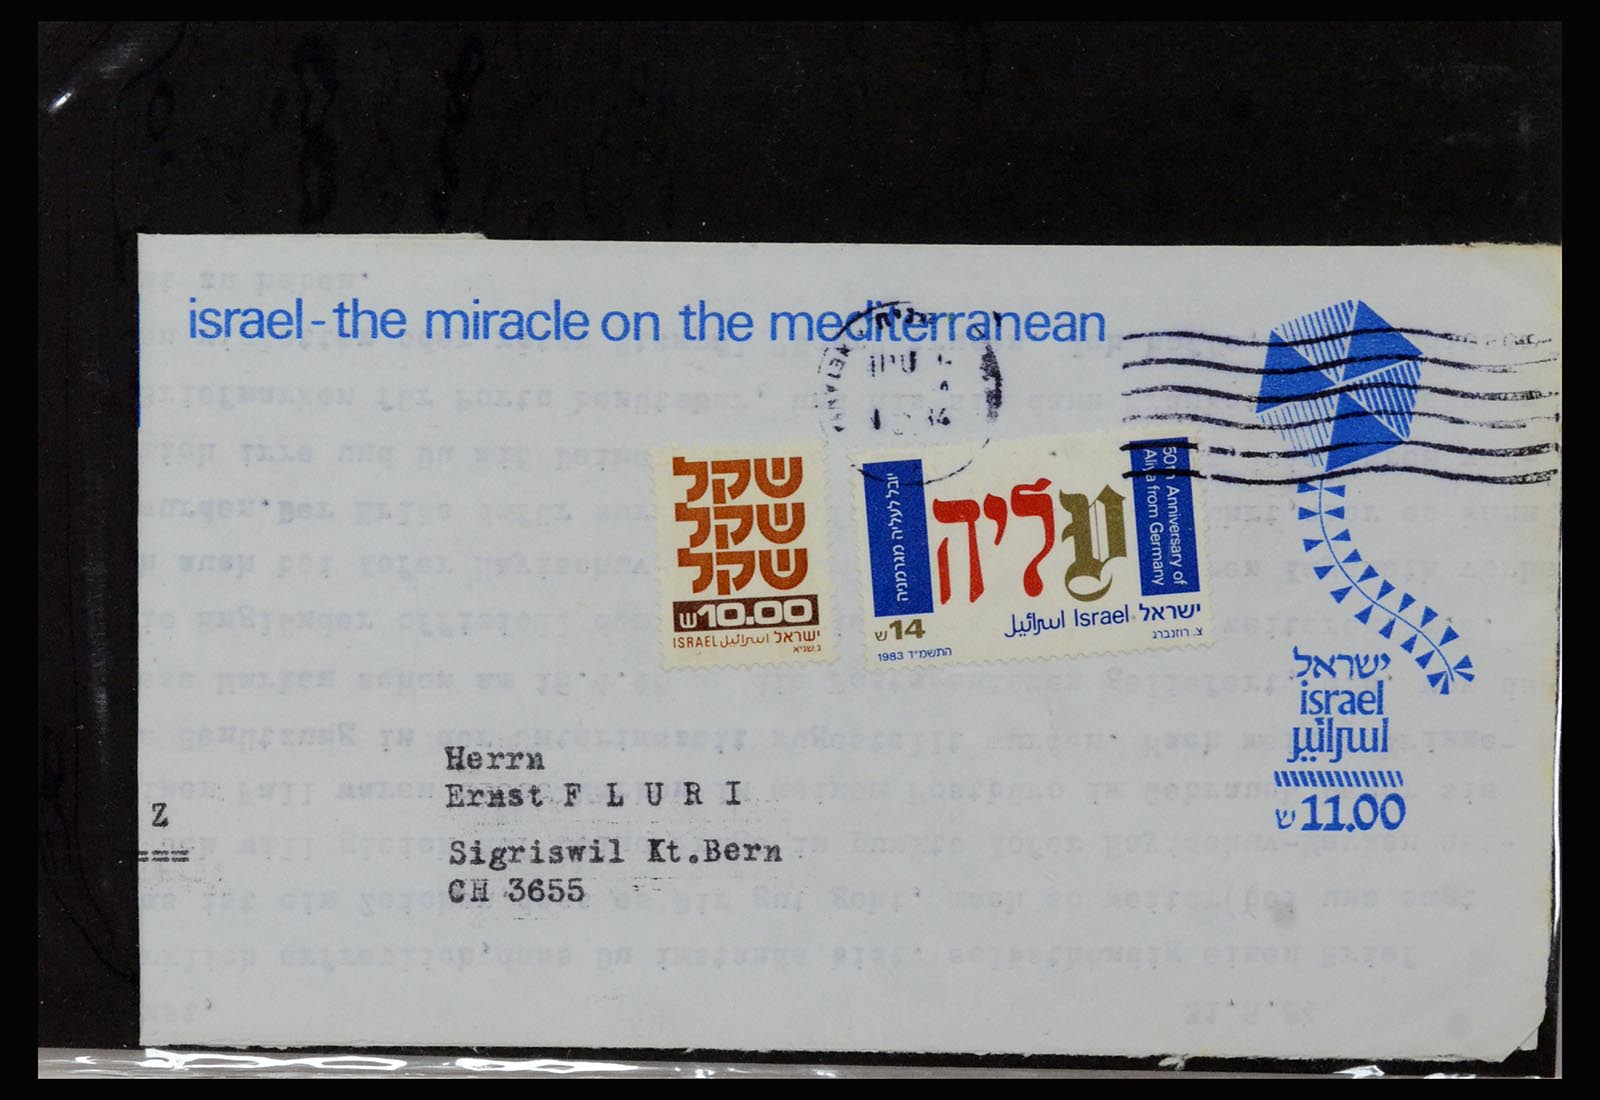 37059 531 - Stamp collection 37059 Israel covers and FDC's 1948-1970.